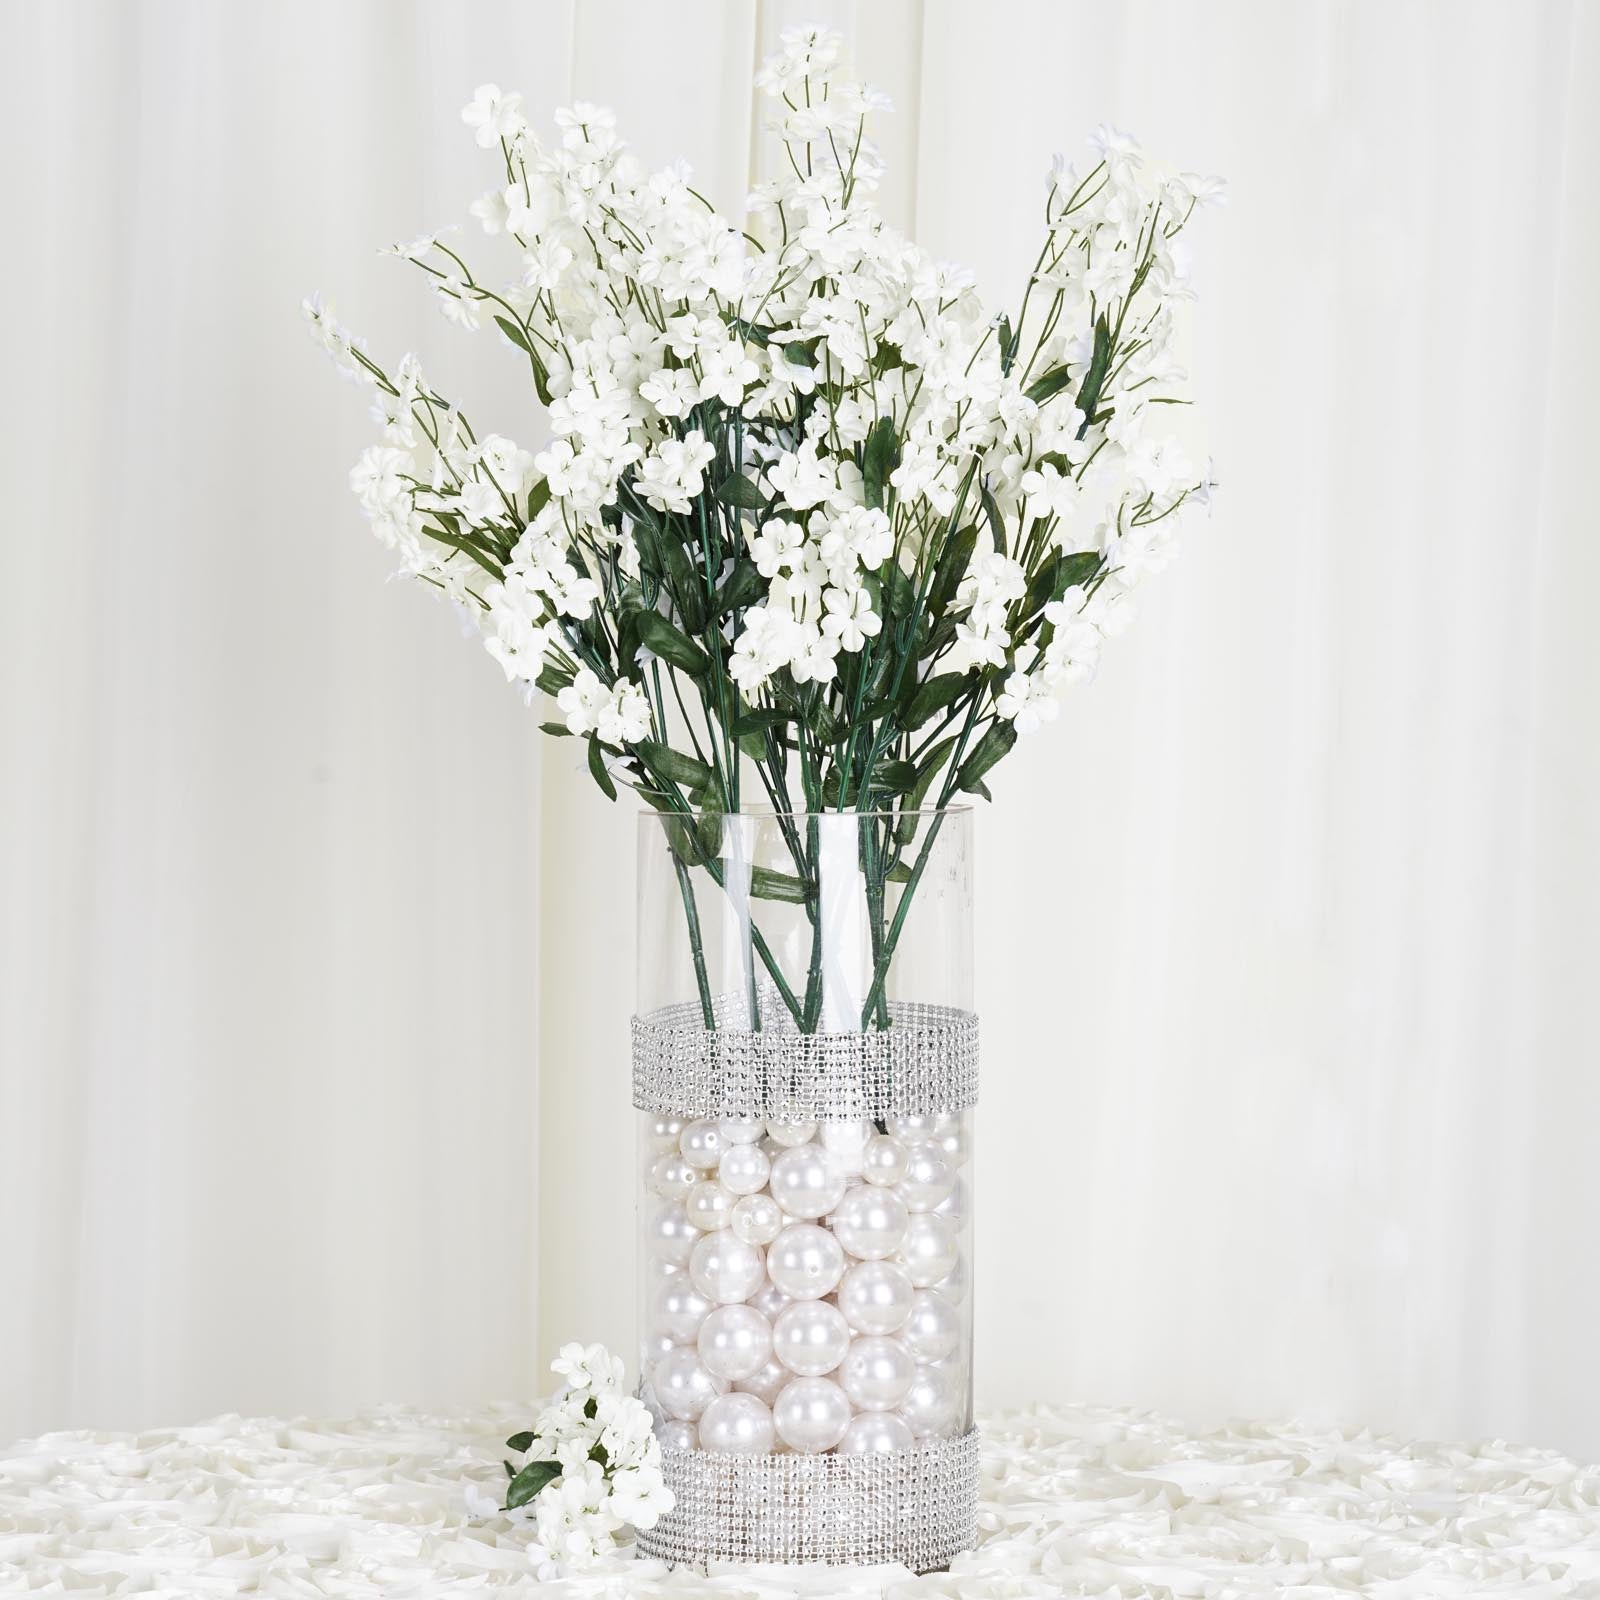 Efavormart 12 Bushes Baby Breath Artificial Filler Flowers for DIY Wedding Bouquets Centerpieces Party Home Decoration - Ivory, Beige